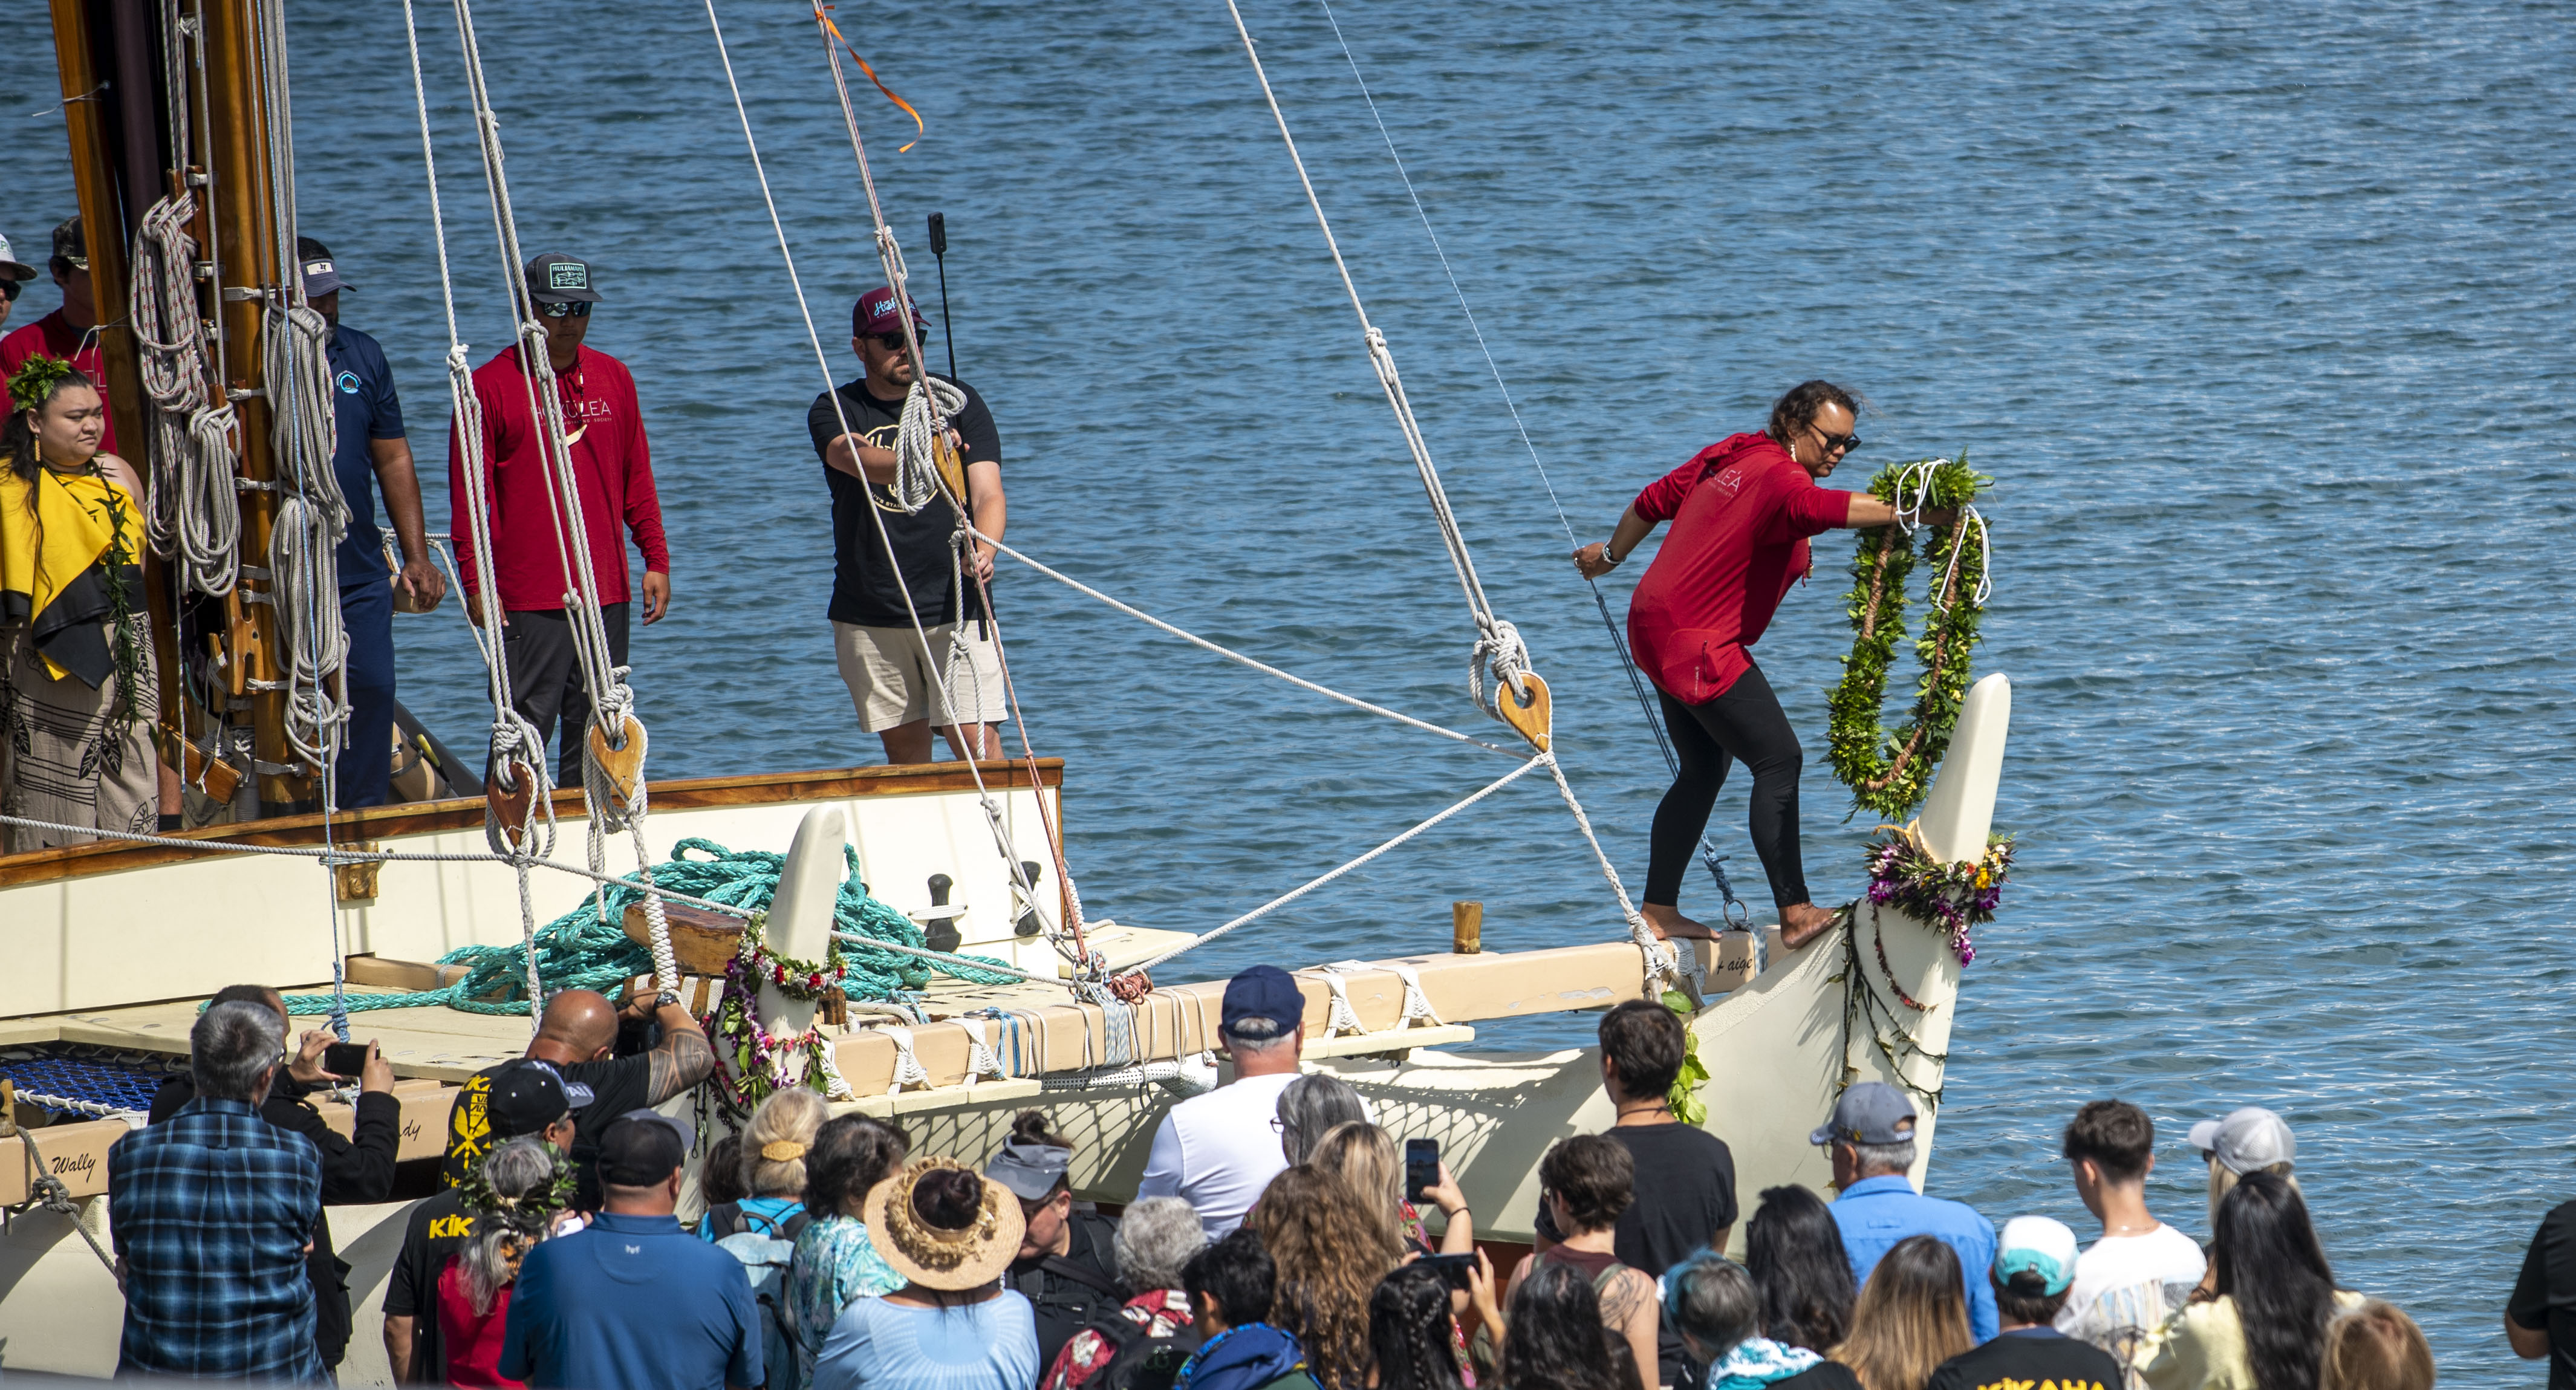 The Hōkūleʻa was welcomed with a day of ceremony and celebration.